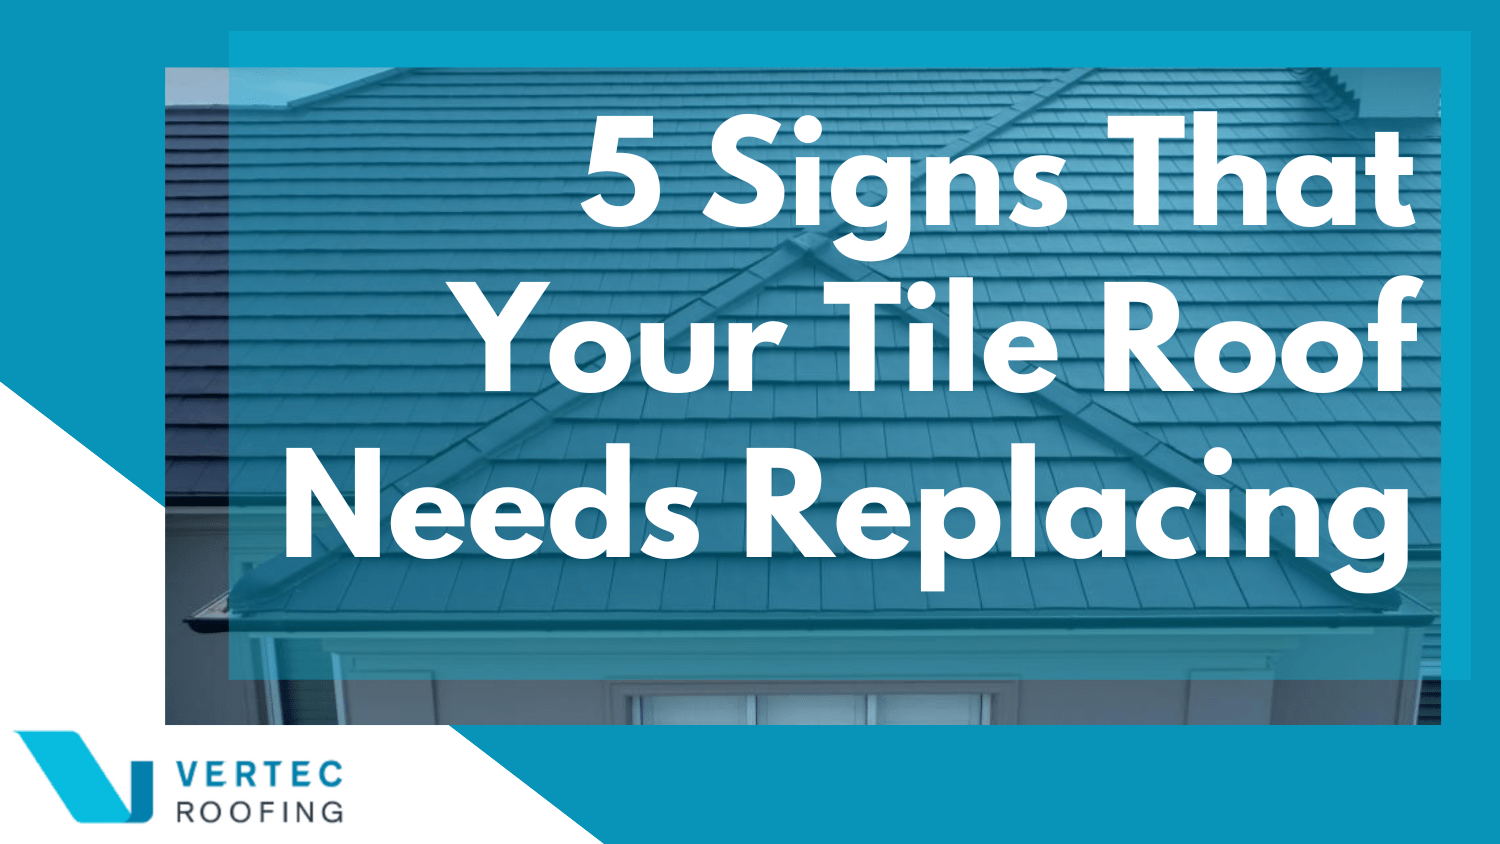 5 Signs That Your Tile Roof Needs Replacing